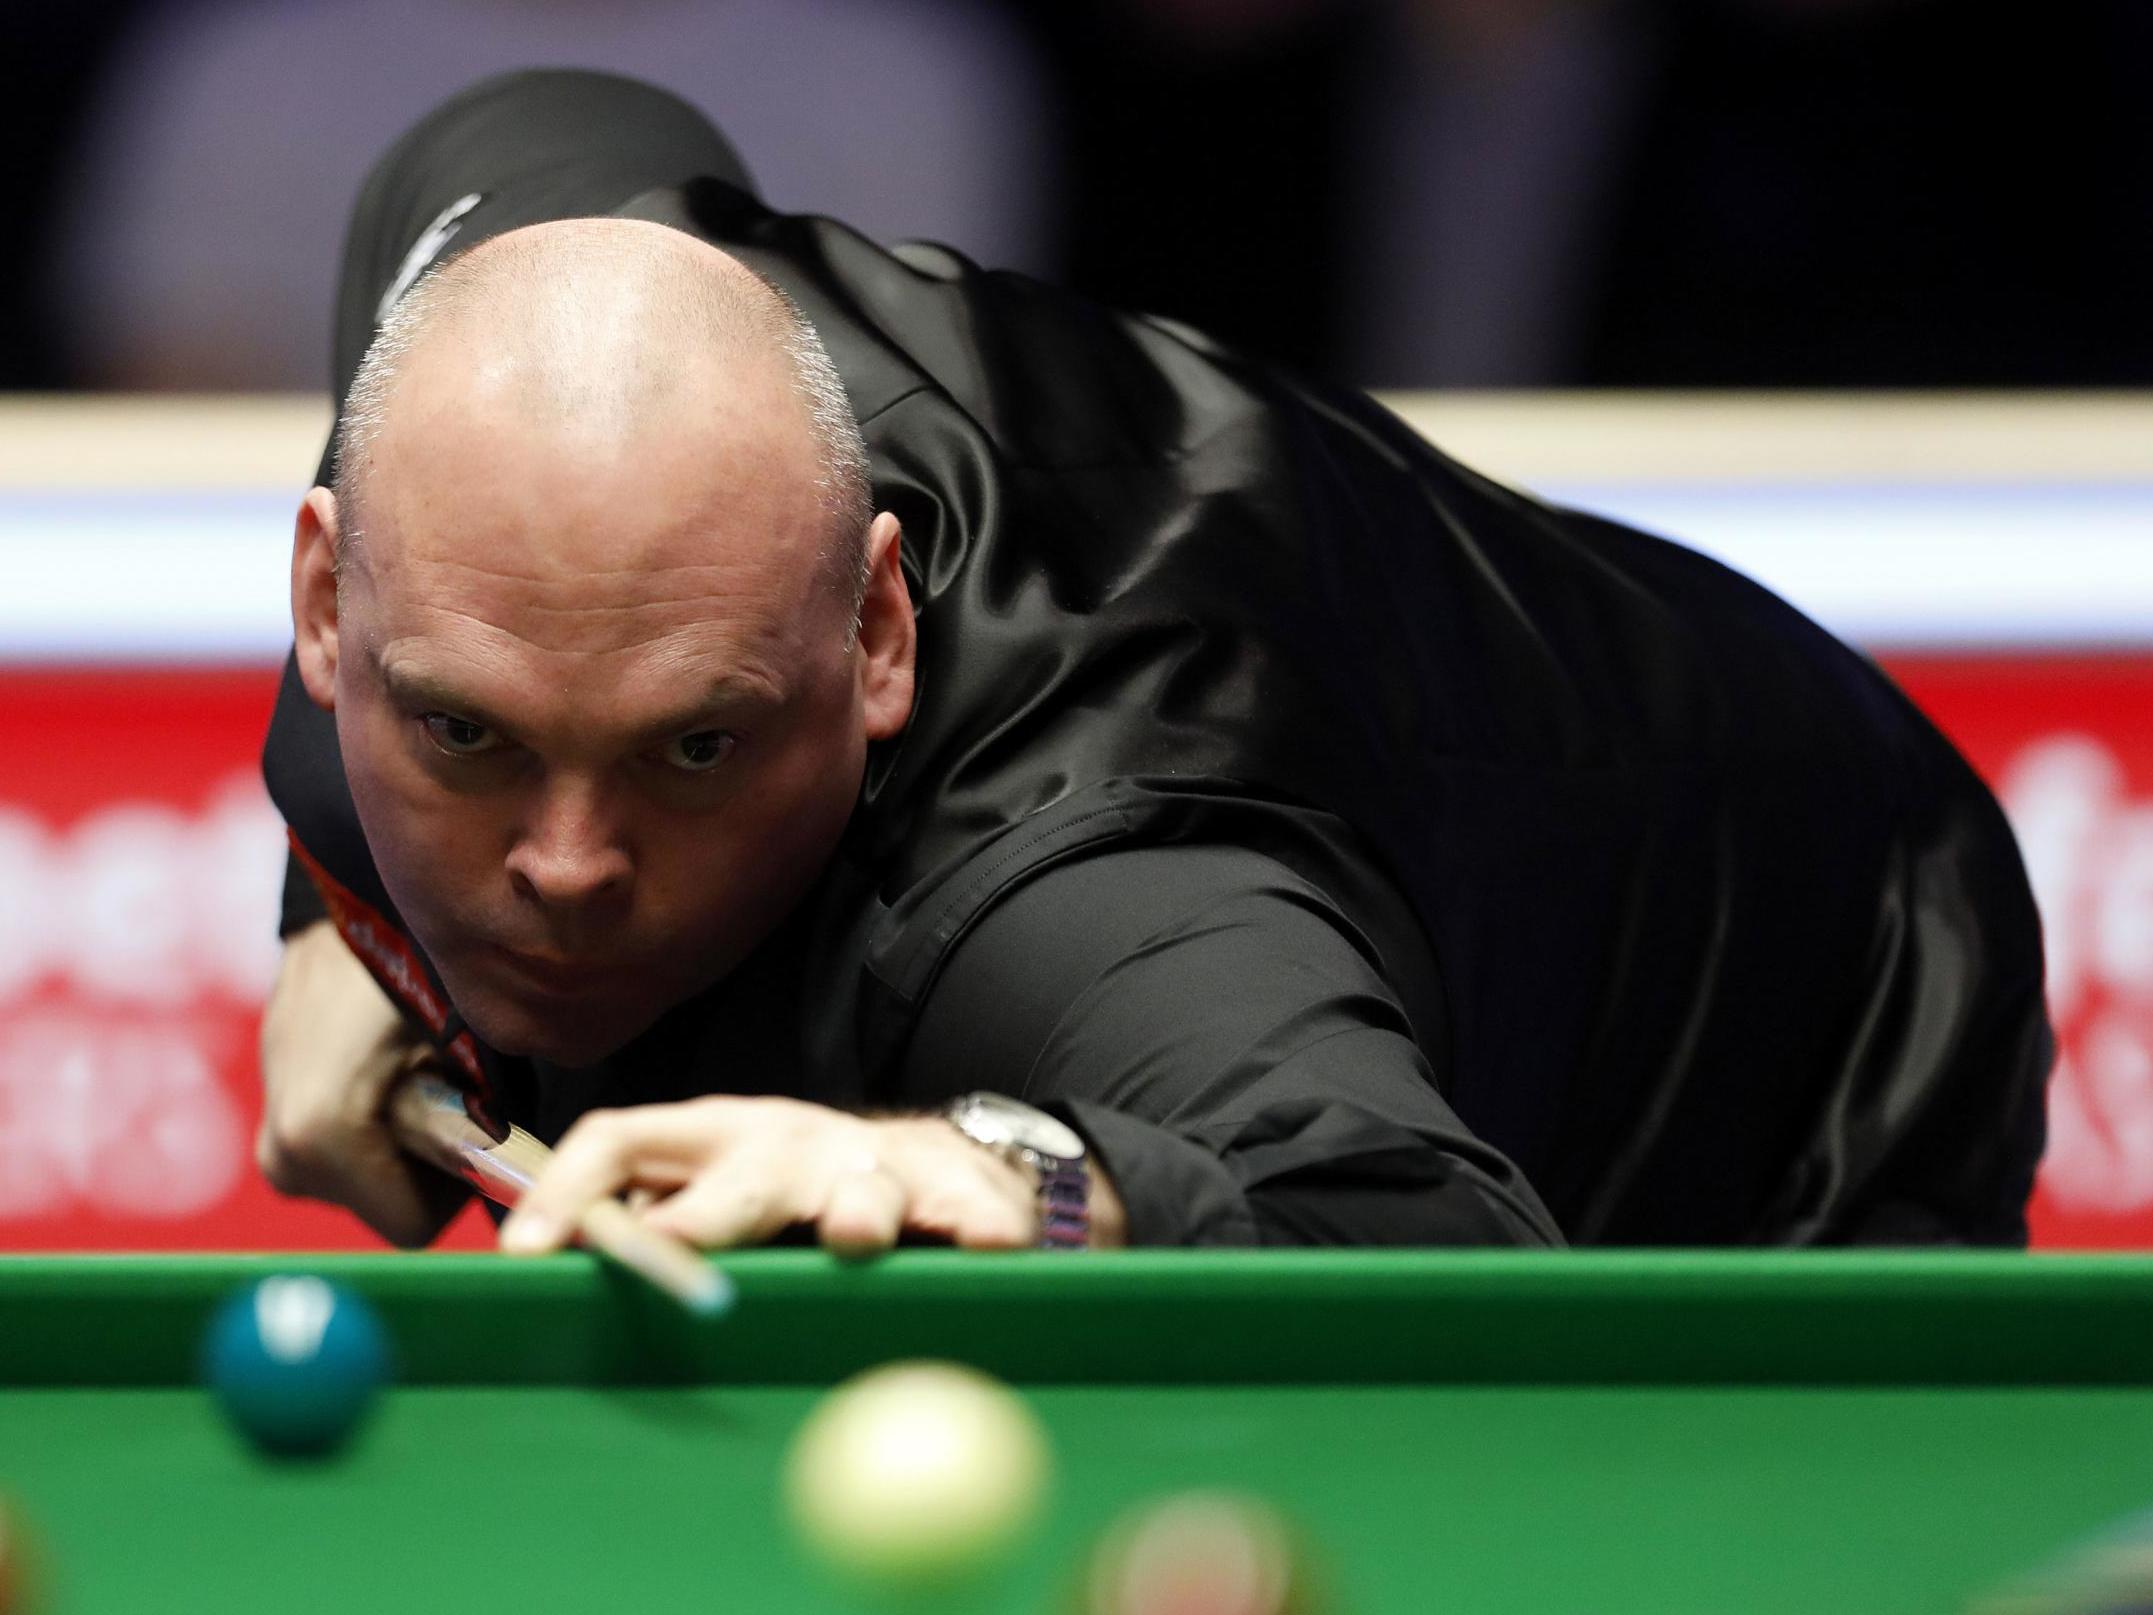 Stuart Bingham battles through in first round of World Snooker Championship The Independent The Independent